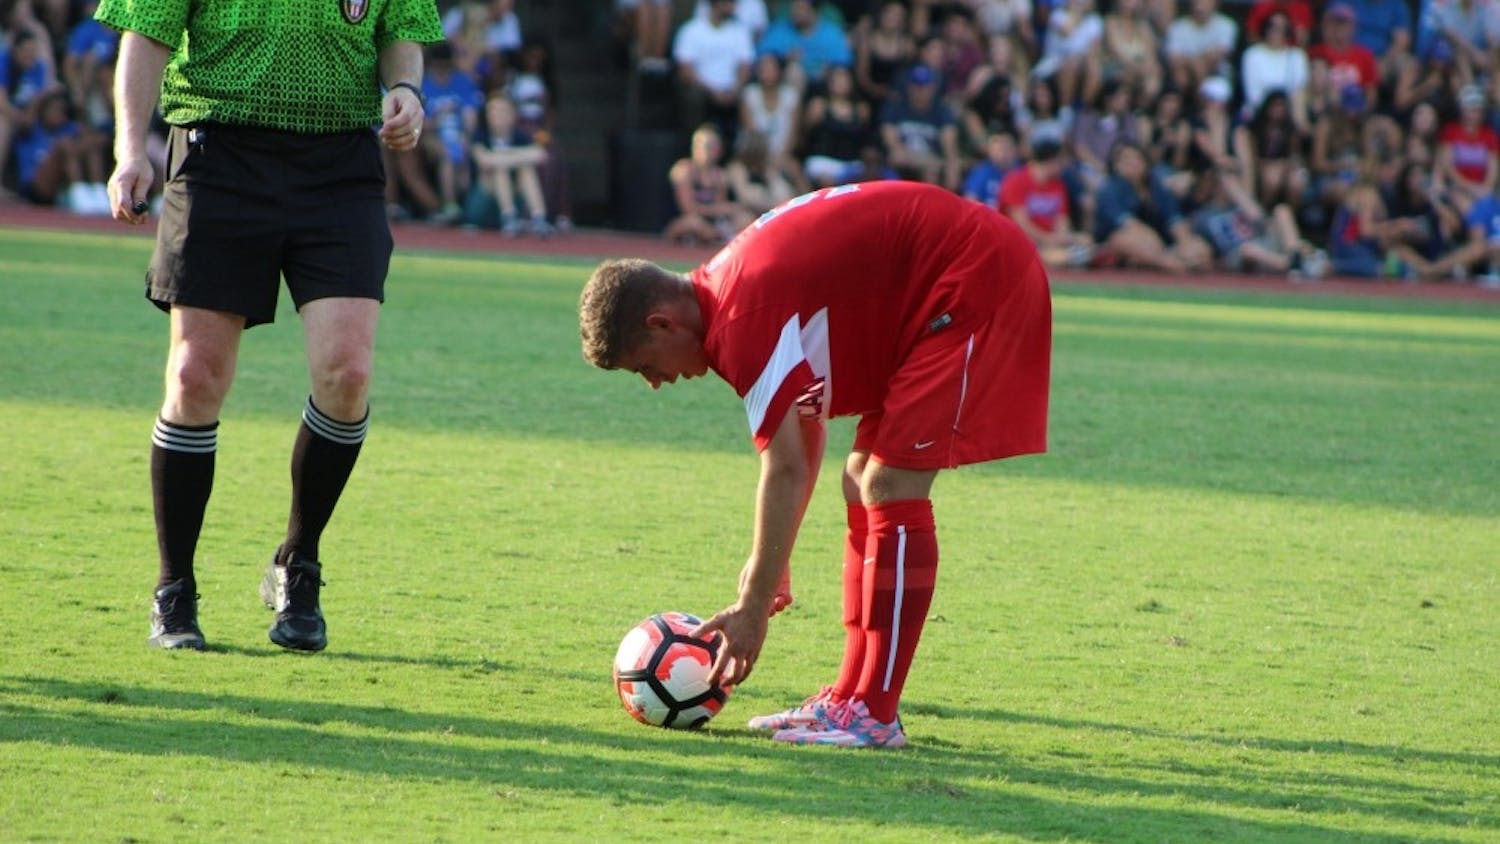 Sophomore Tim Neumann places the ball for a free kick in a photo taken from the 2016 season.